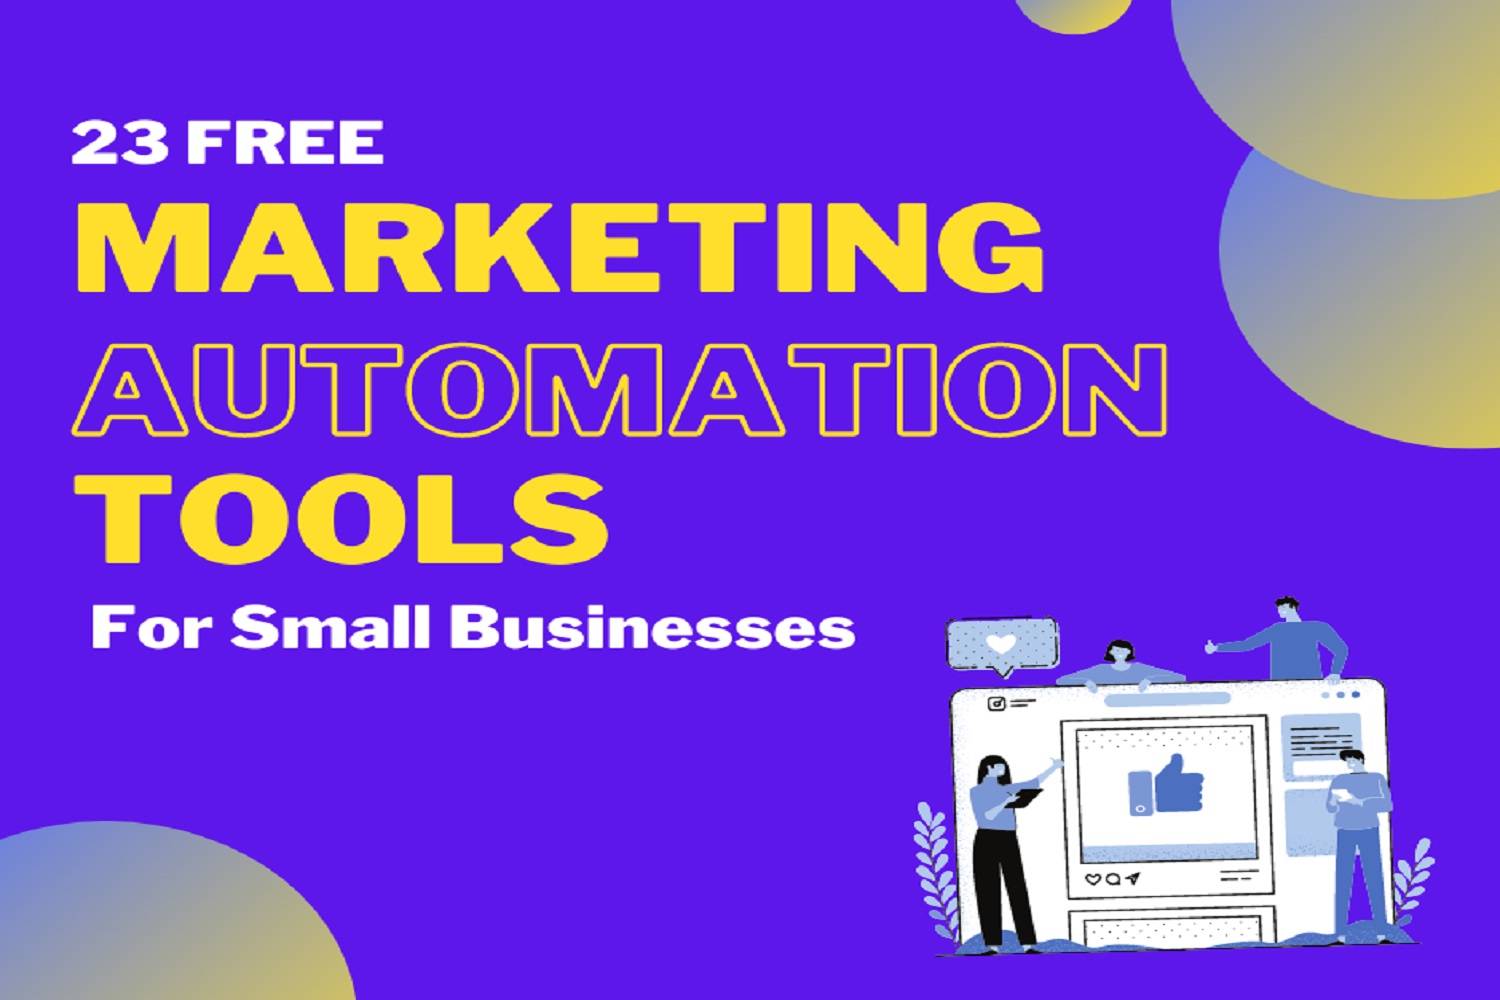 23 Free Marketing Automation Tools For Small Businesses | Abdul Ehsan | Entrepreneur and Digital Marketing Consultant in Sri Lanka